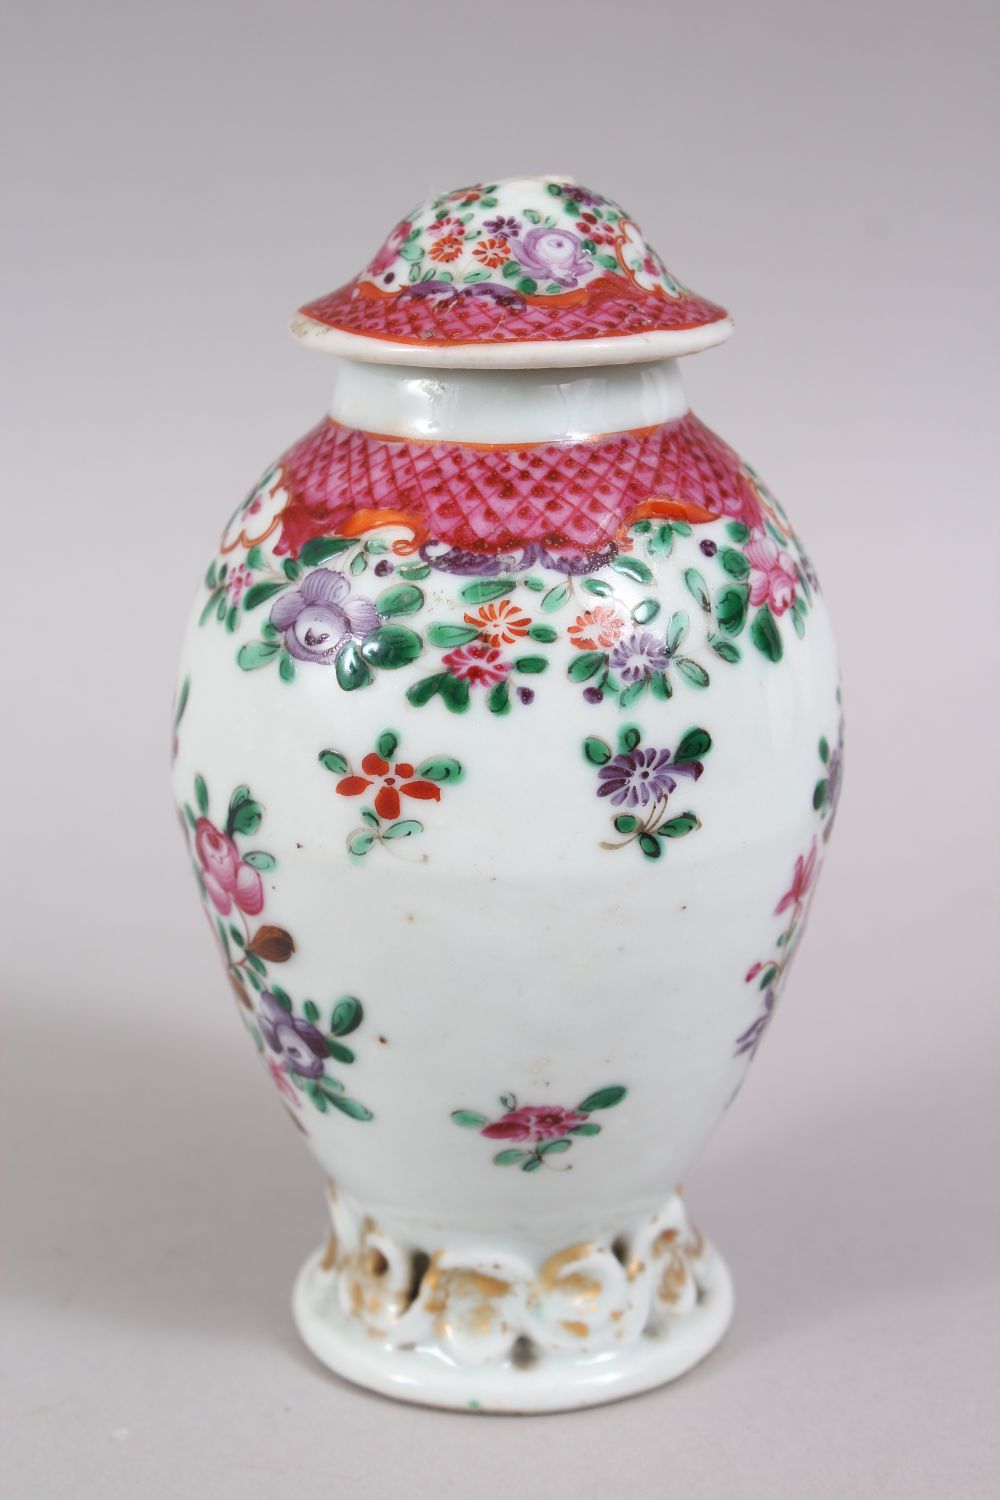 A CHINESE 19TH CENTURY FAMILLE ROSE PORCELAIN TEA CADDY, decorated with floral design, 13cm high. - Image 2 of 5